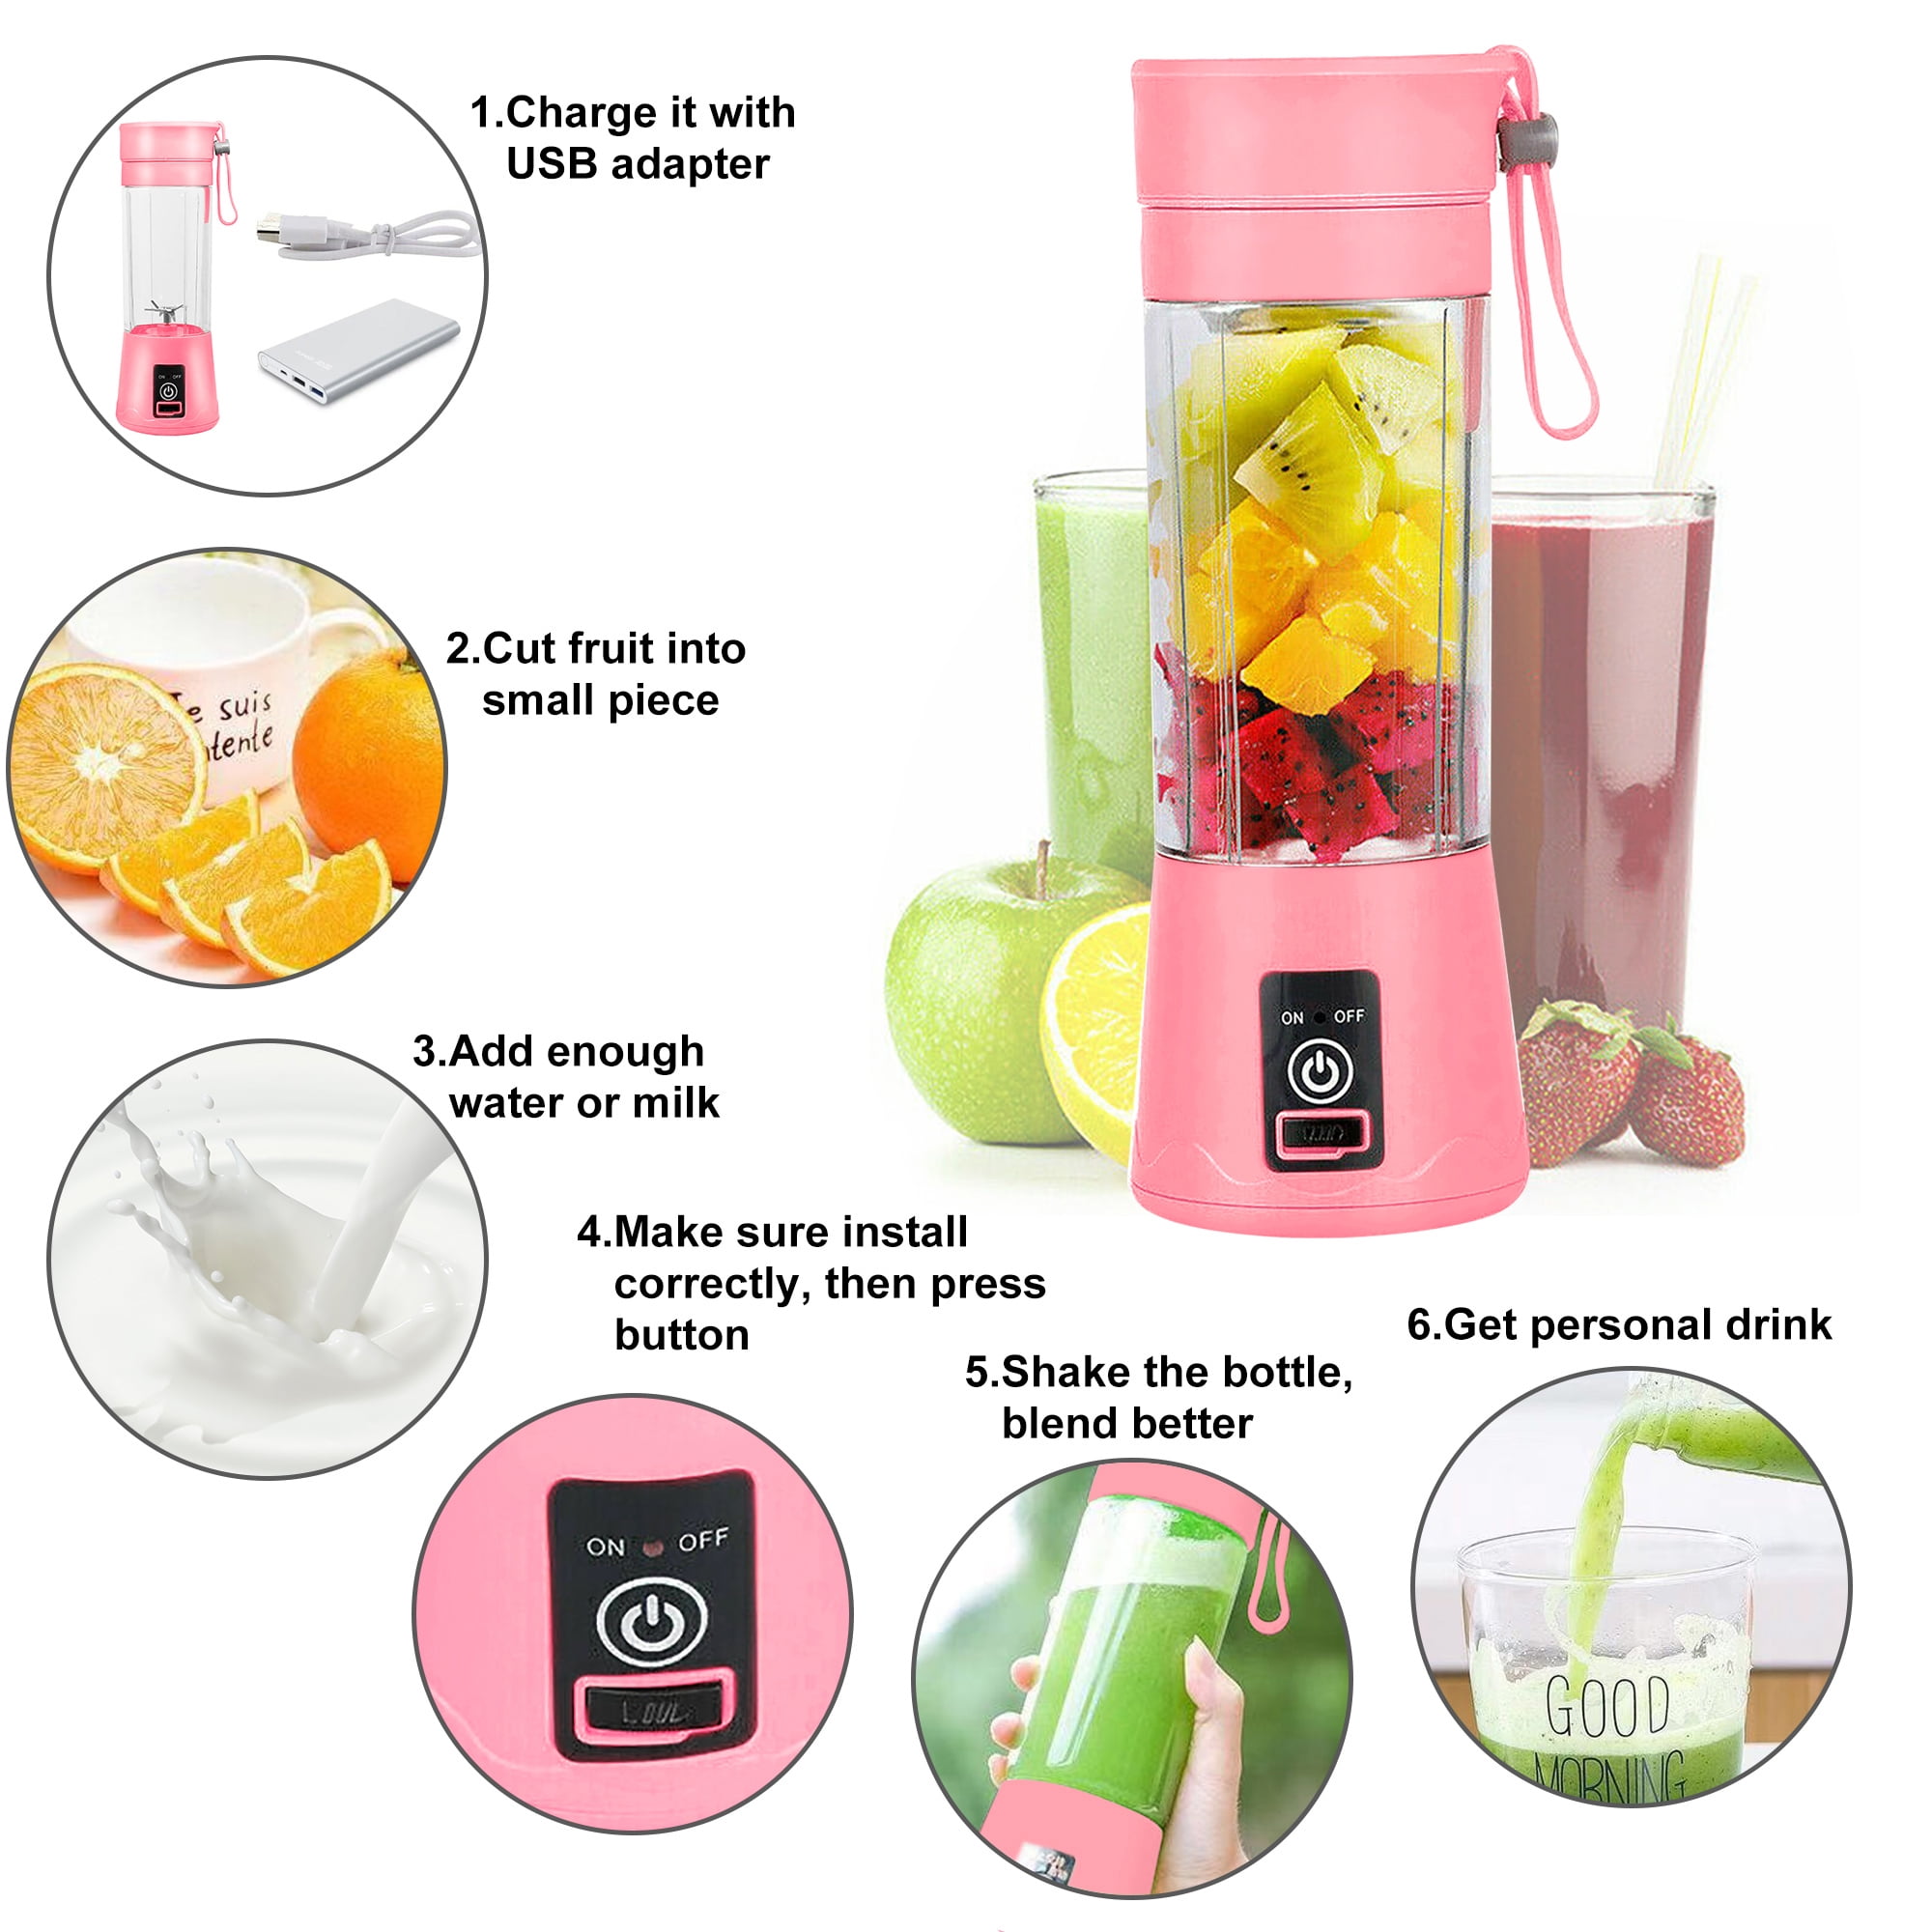 Portable Blender, Mini USB Blender for Shakes and Smoothies 13.5 oz Juicer Cup Type-C Personal Blender with Ultra Sharp Six Blades,BPA Free Blender